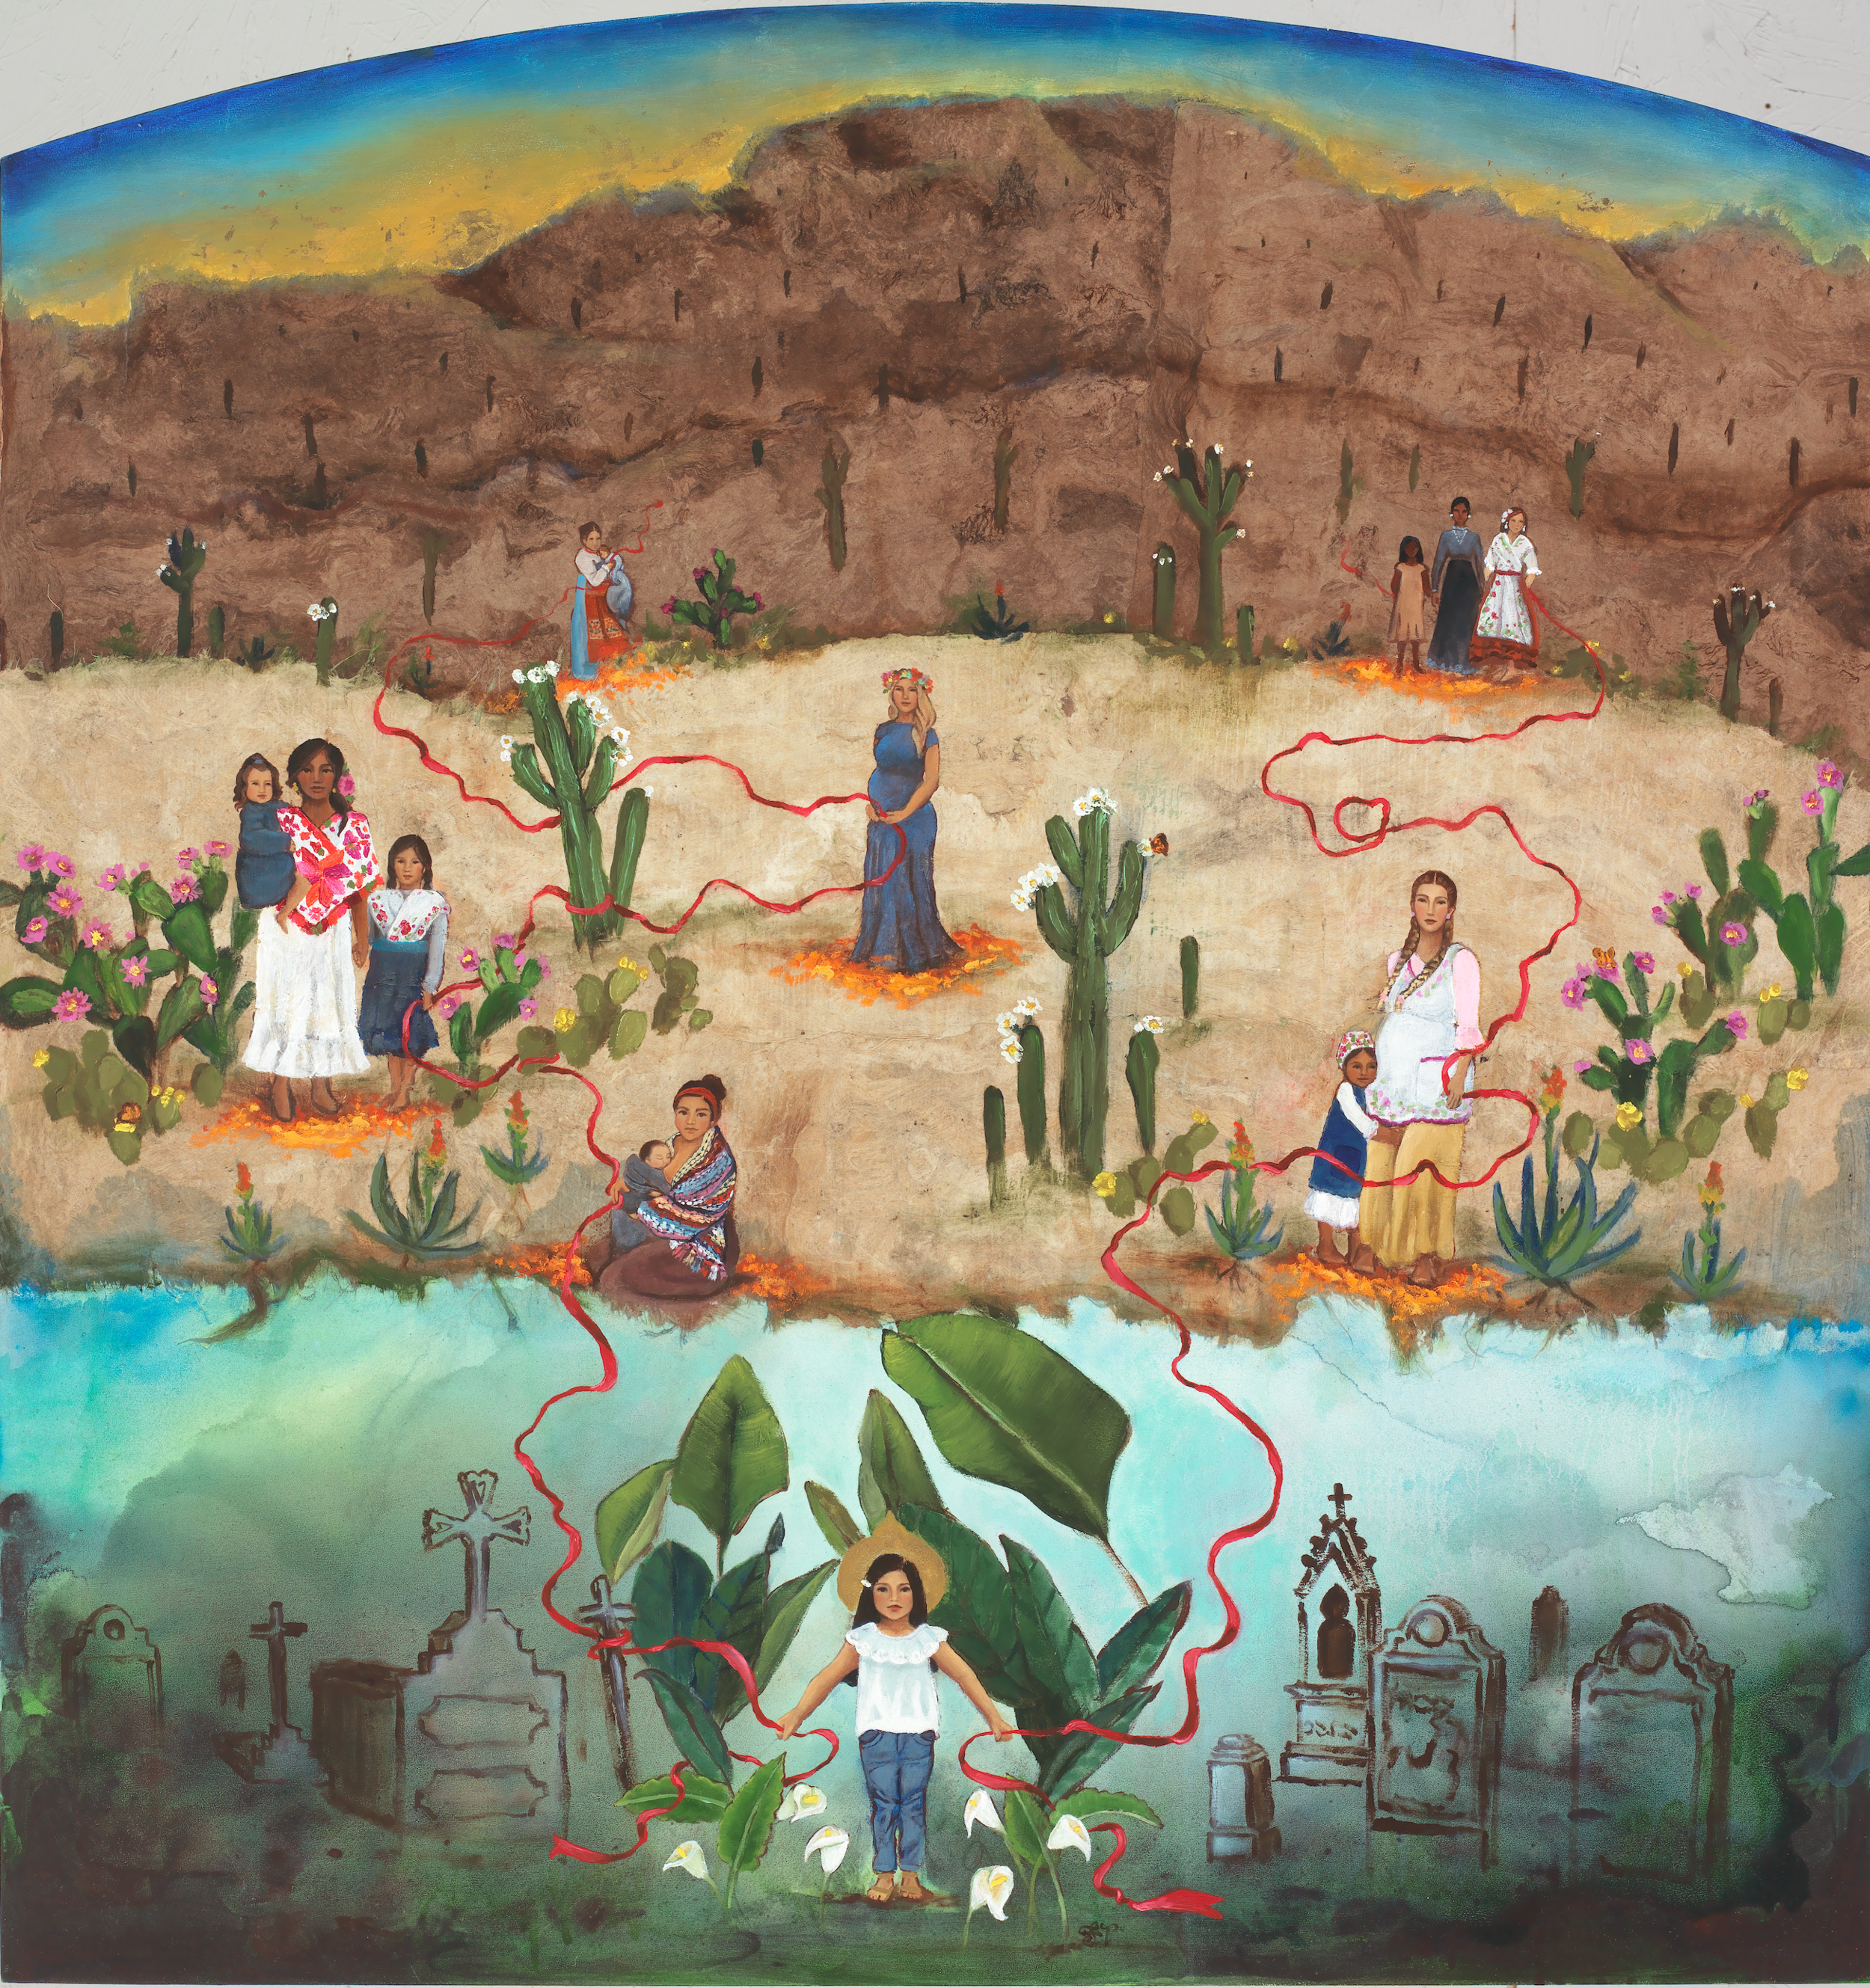 A painting of women in mountains, a desert, and a cemetery holding onto a red ribbon that connects them.